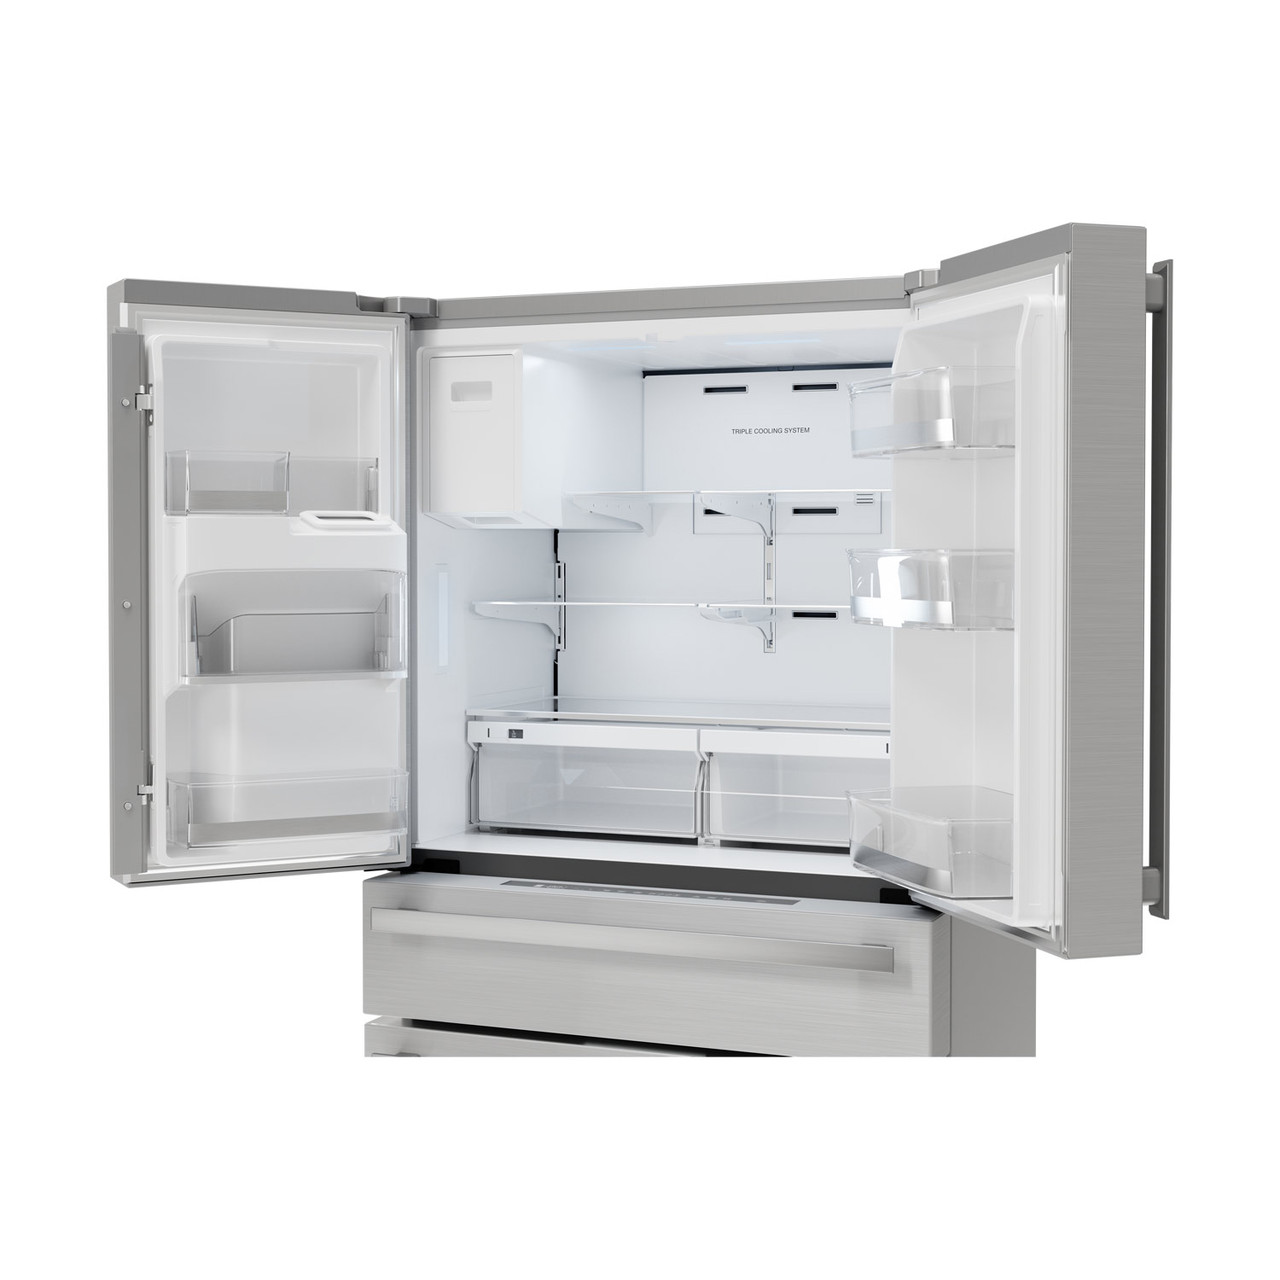 Sharp French 4-Door Counter-Depth Refrigerator with Water Dispenser (SJG2254FS) - left angle view with doors open